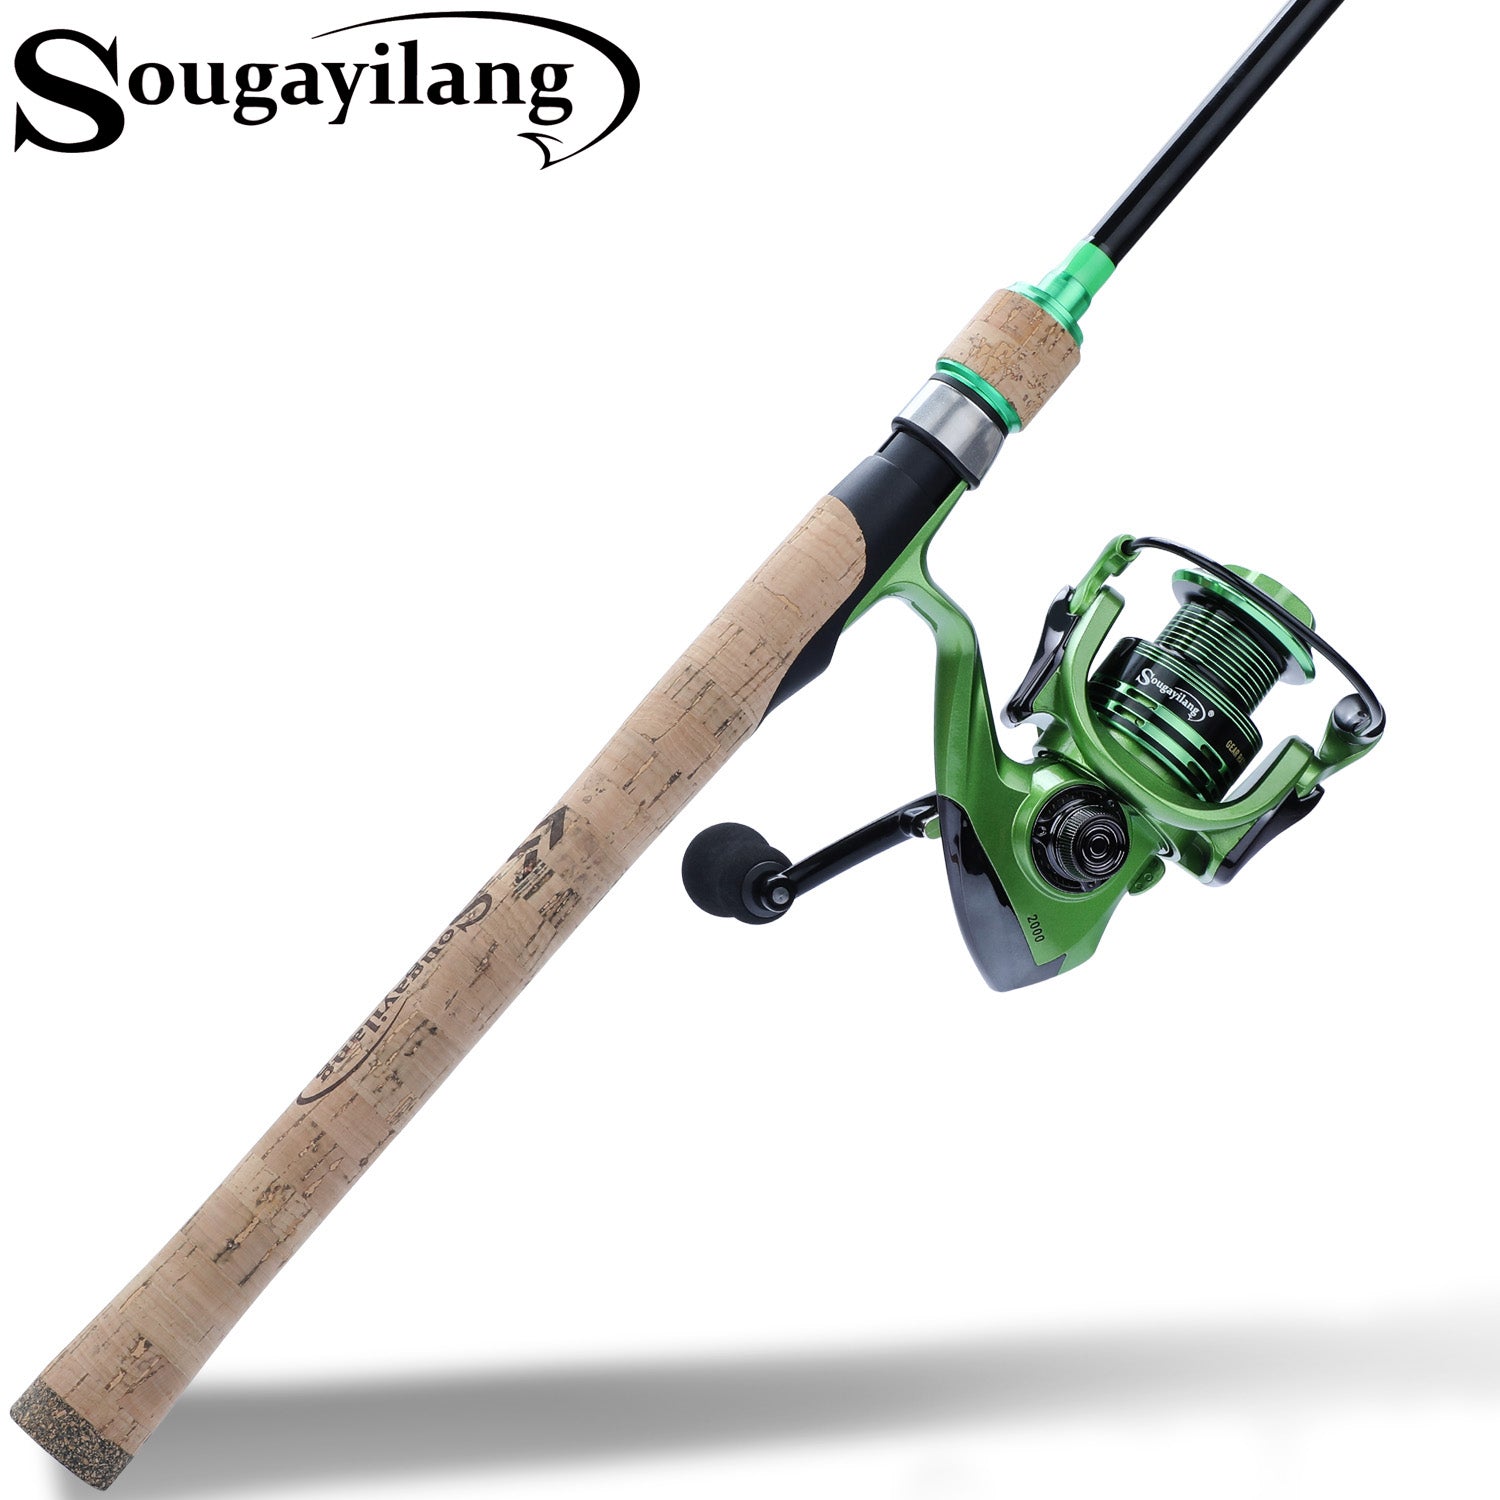 Sougayilang Fishing Rod Reel Combos, Protable Light Weight Carbon Fiber  Travel Fishing Poles with Spinning Reels for Bass